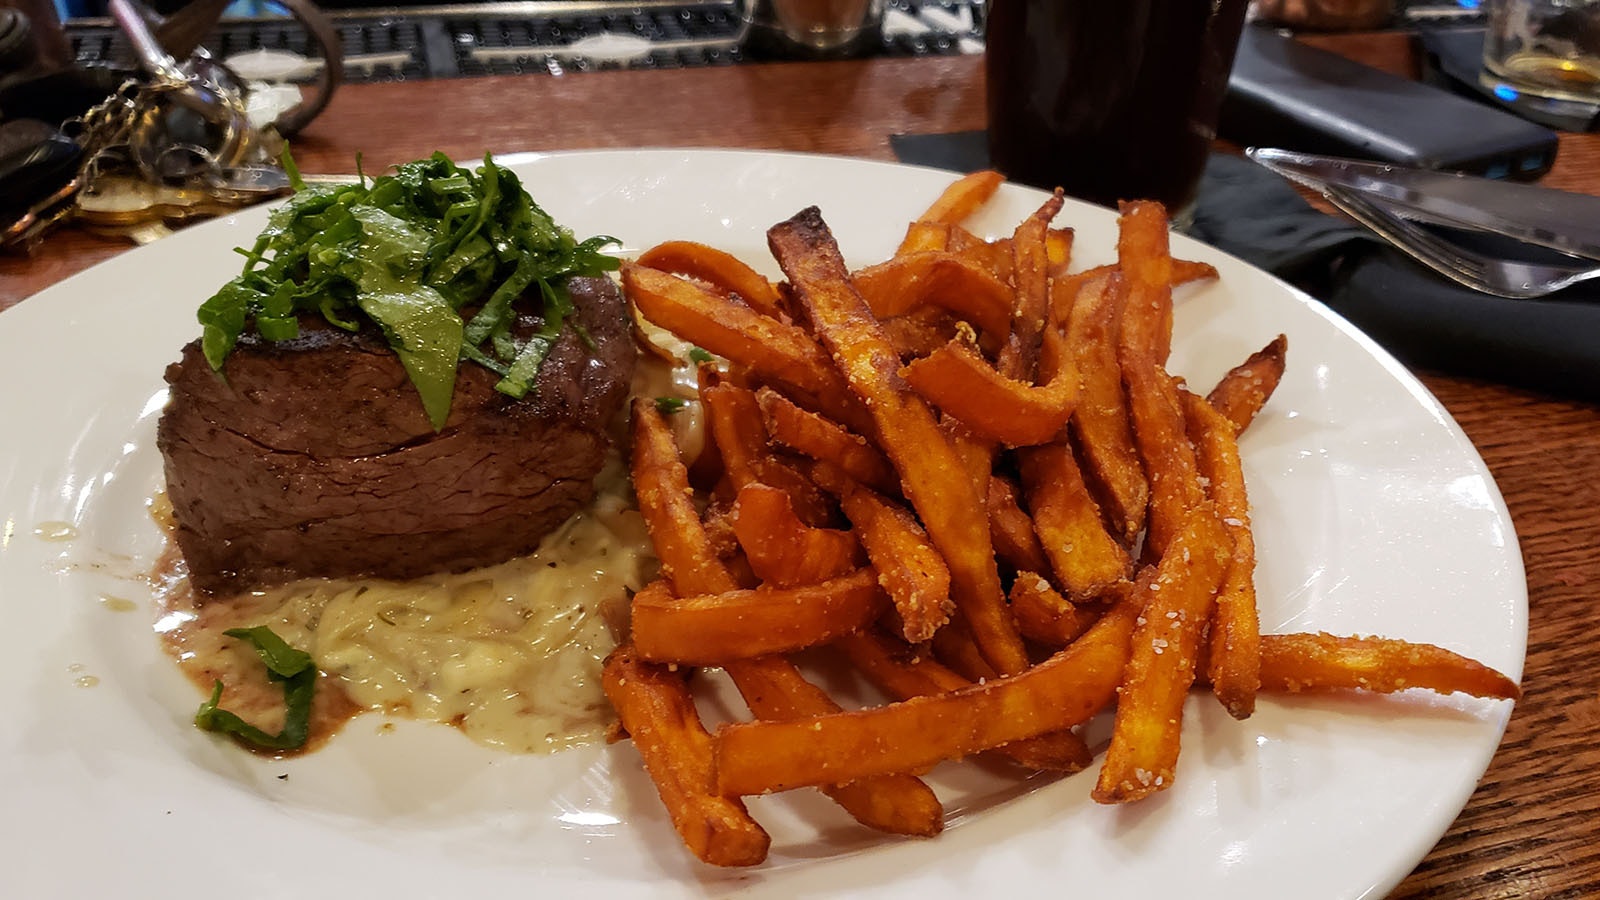 A tender tenderloin paired with sweet potato fries